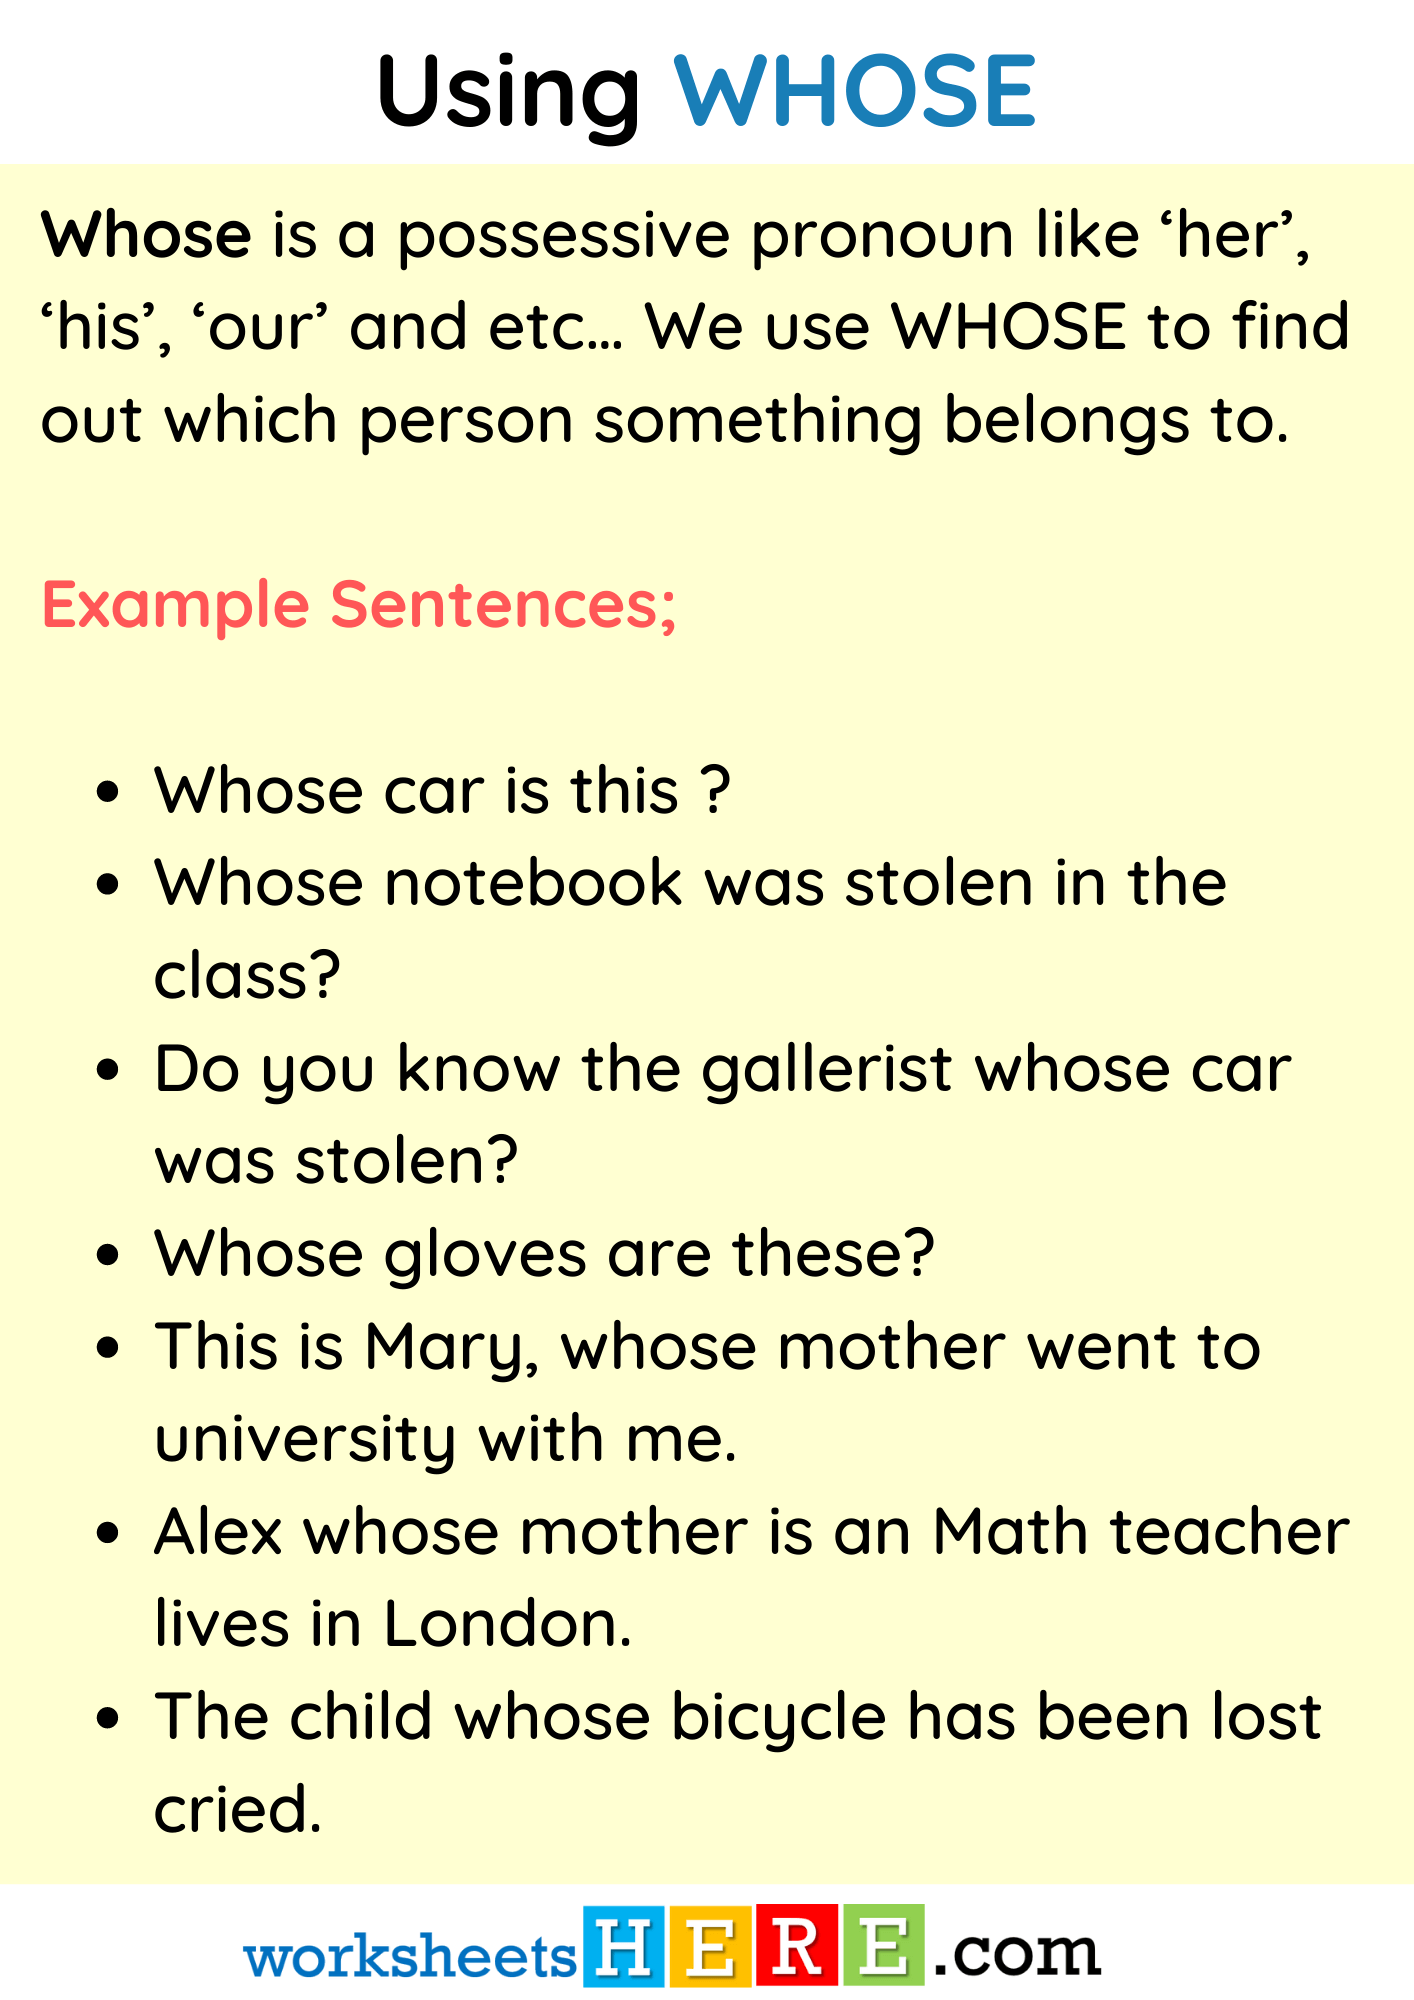 Using WHOSE, Definition and Example Sentences PDF Worksheet For Students